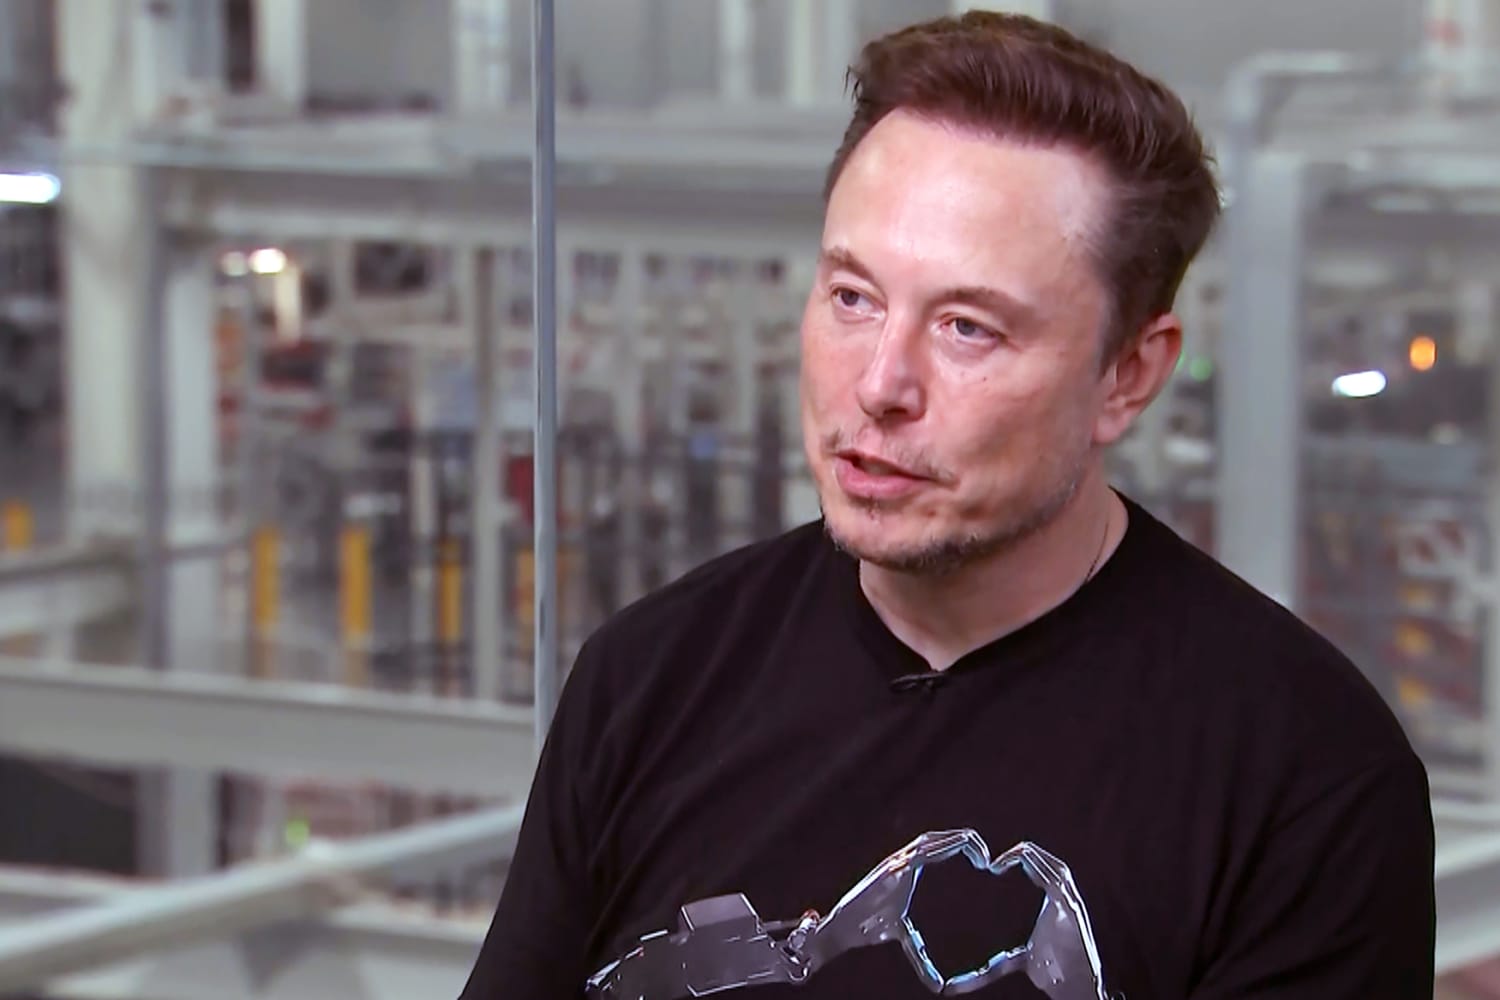 Musk says ‘so be it’ to consequences of his tweeting